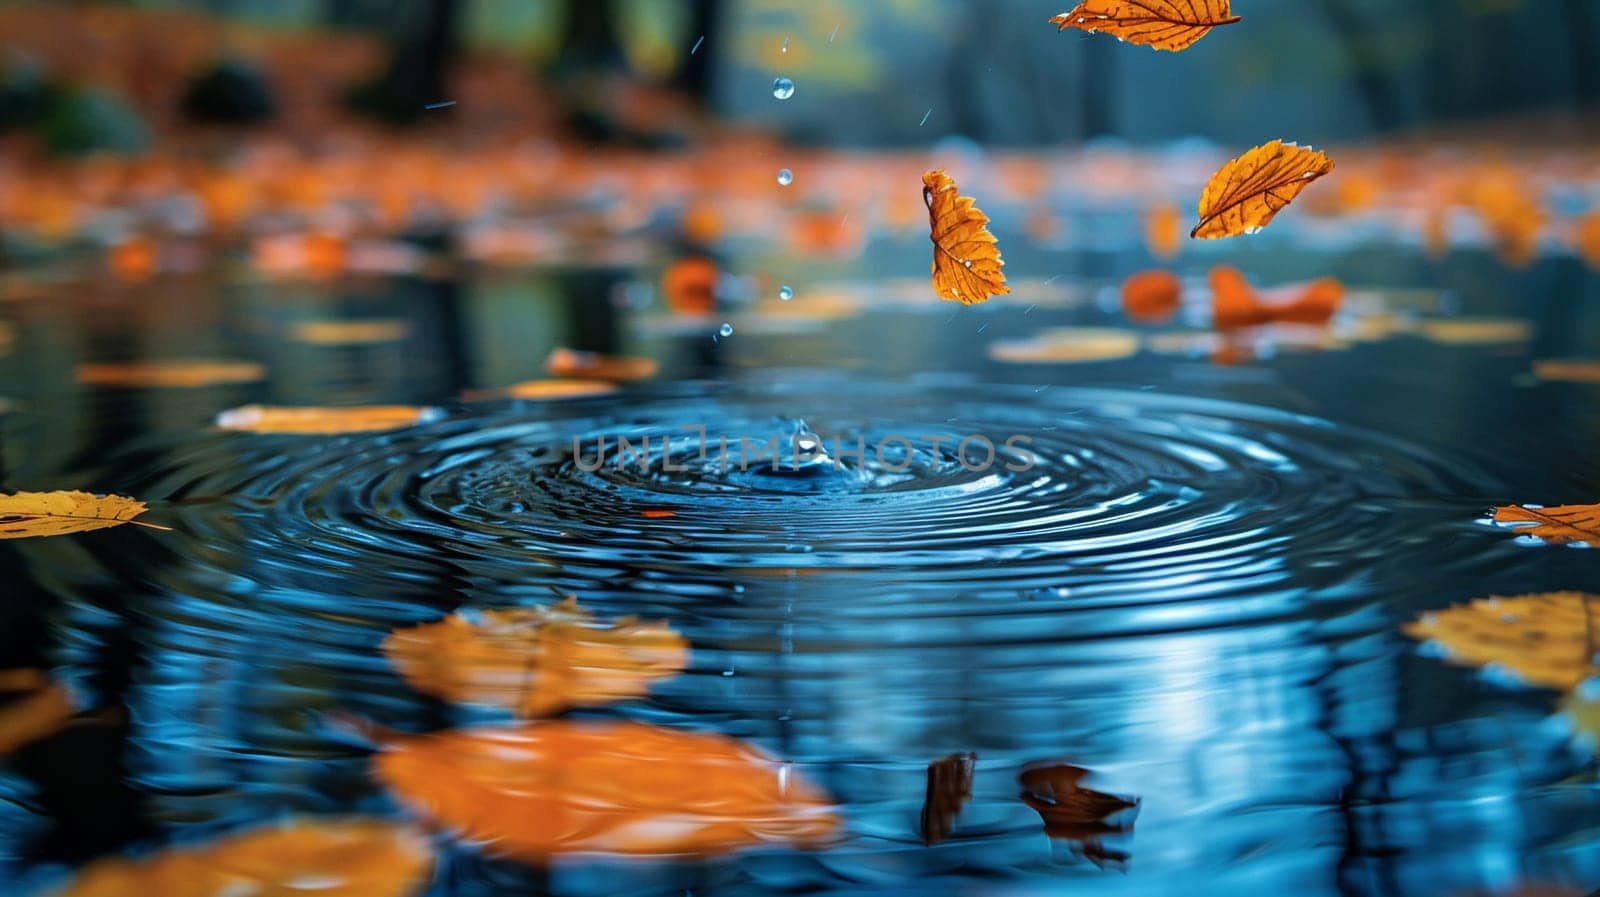 Ripples on a serene pond surface, touched by falling autumn leaves, illustrating change and tranquility.